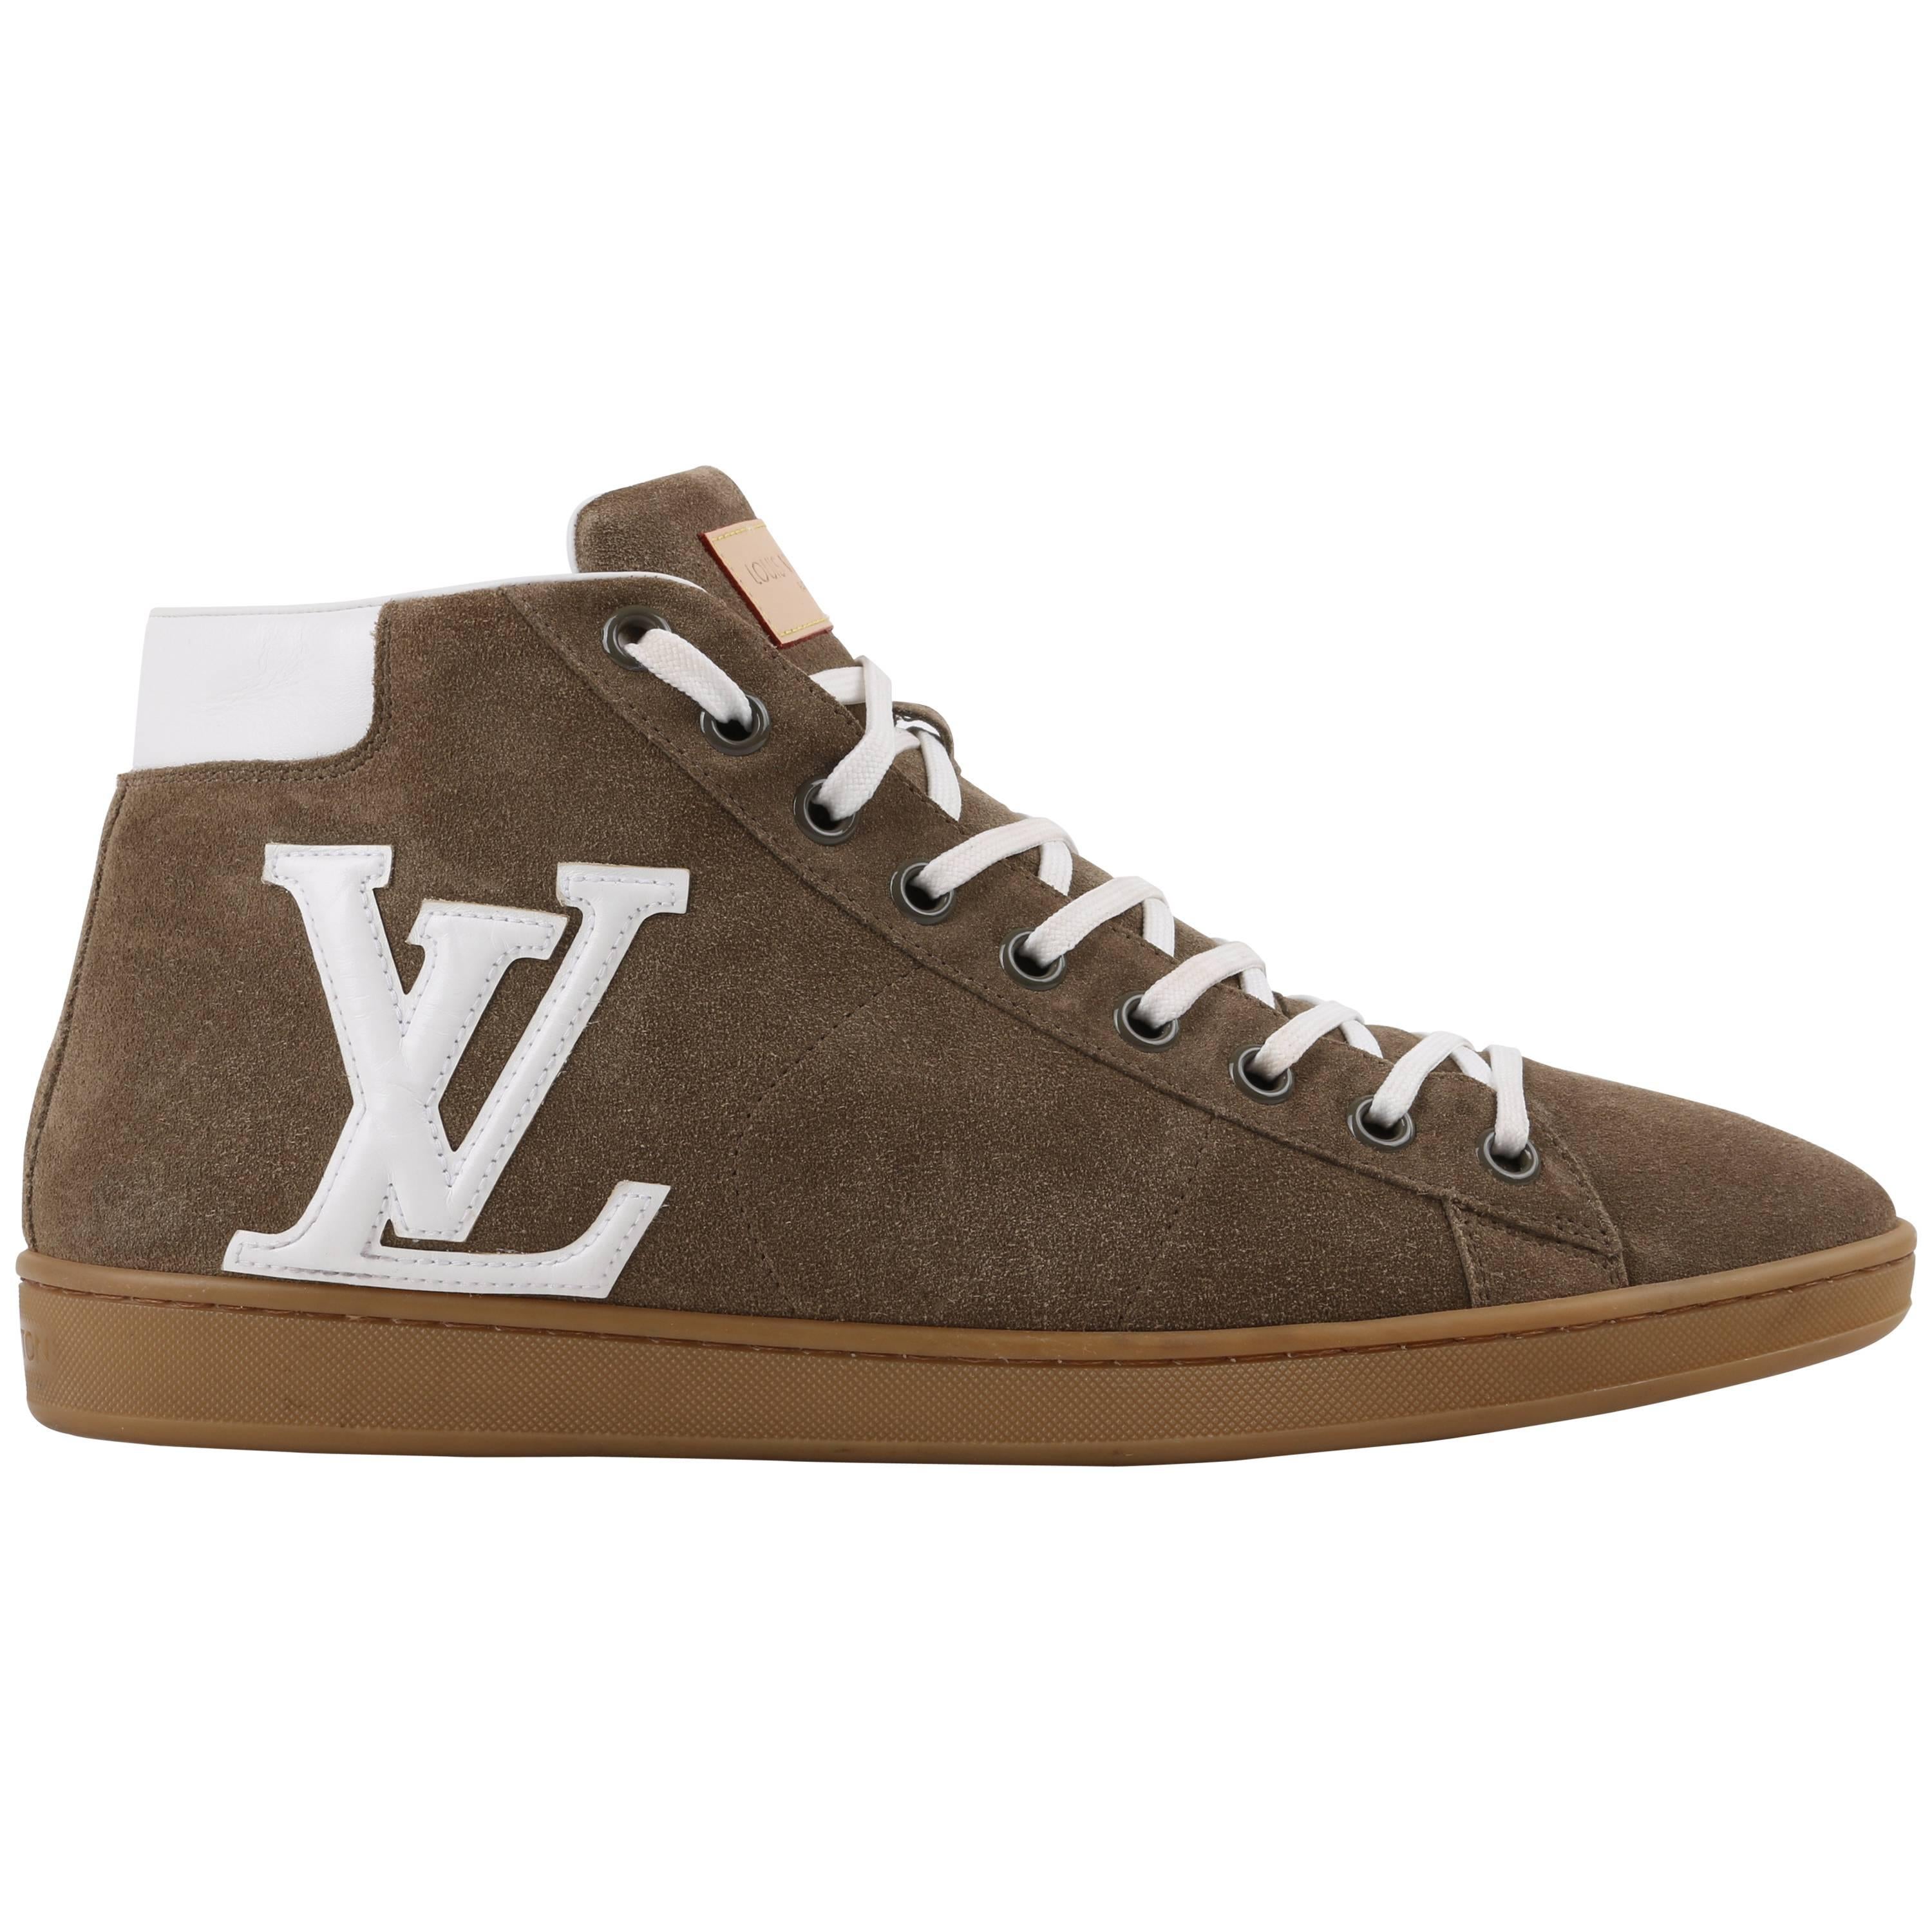 LOUIS VUITTON S/S 2012 Khaki Suede Leather LV High Top "Surfside Sneaker Boot"